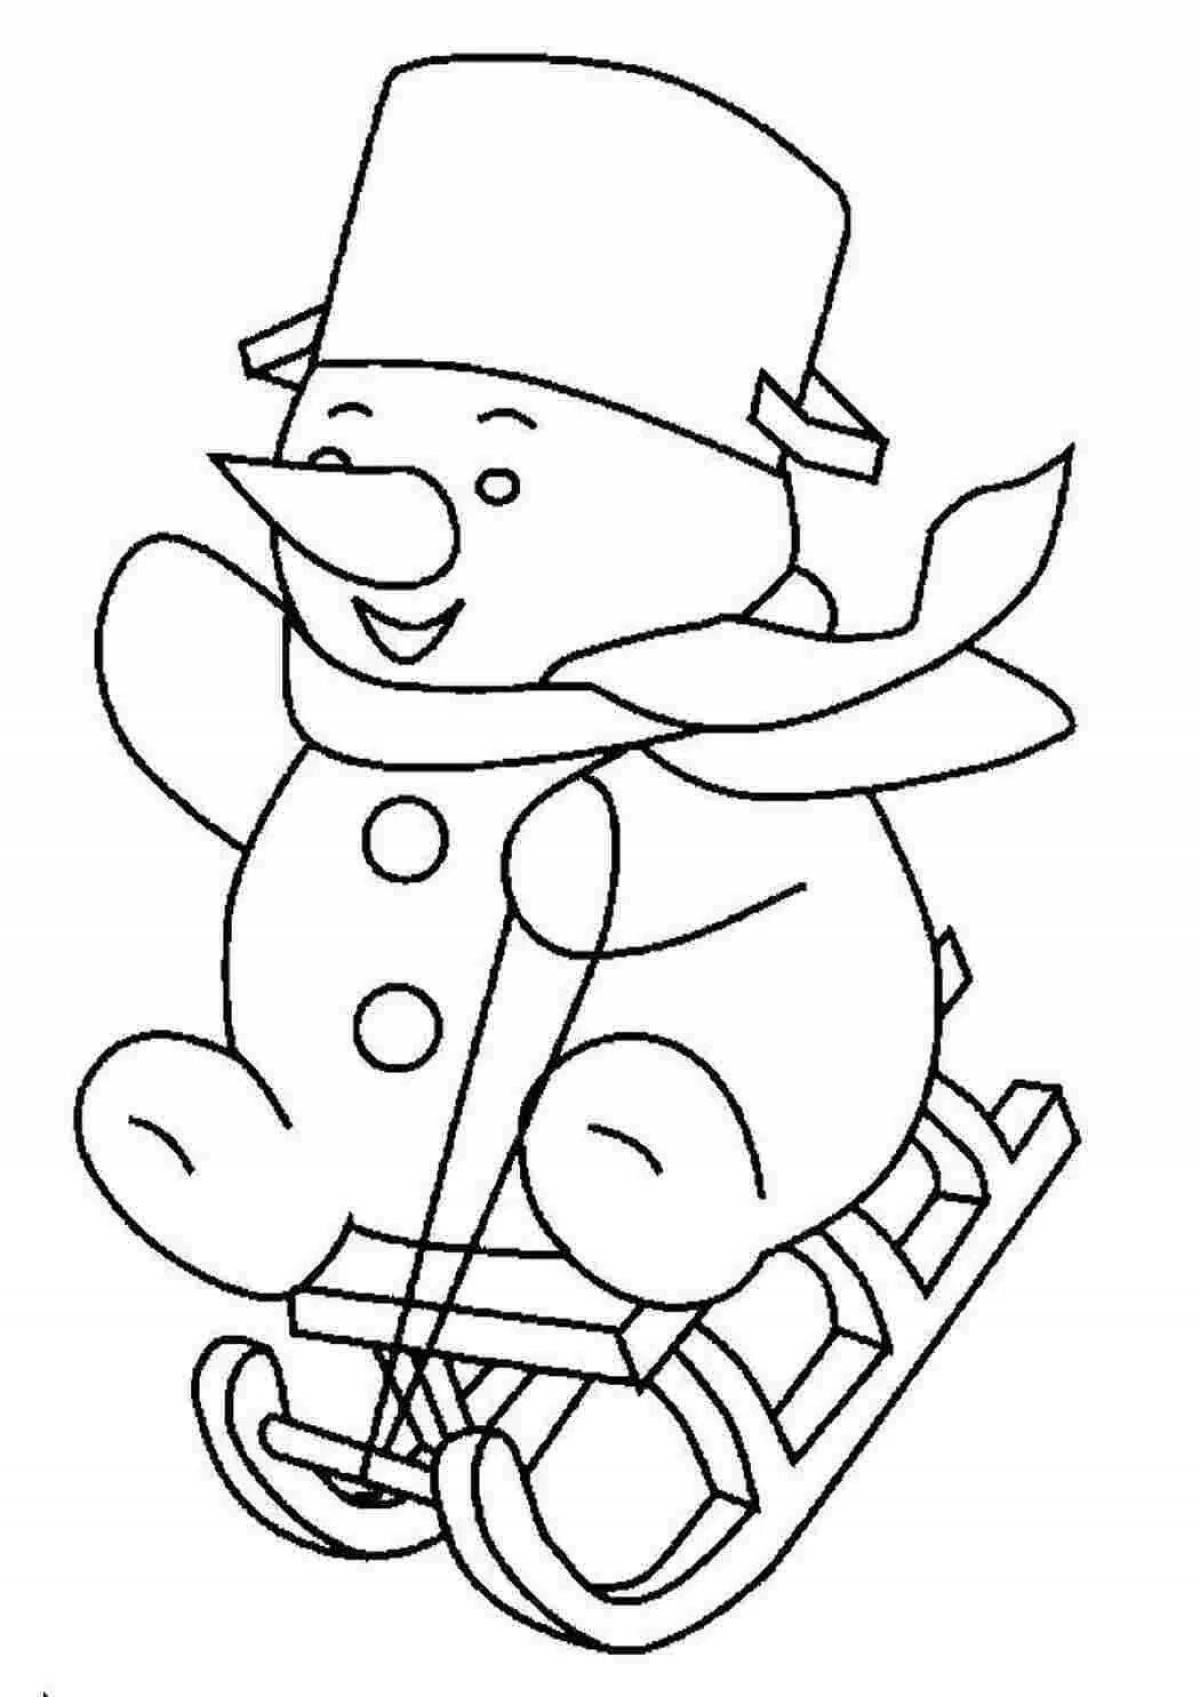 Exciting coloring book snowman on skates